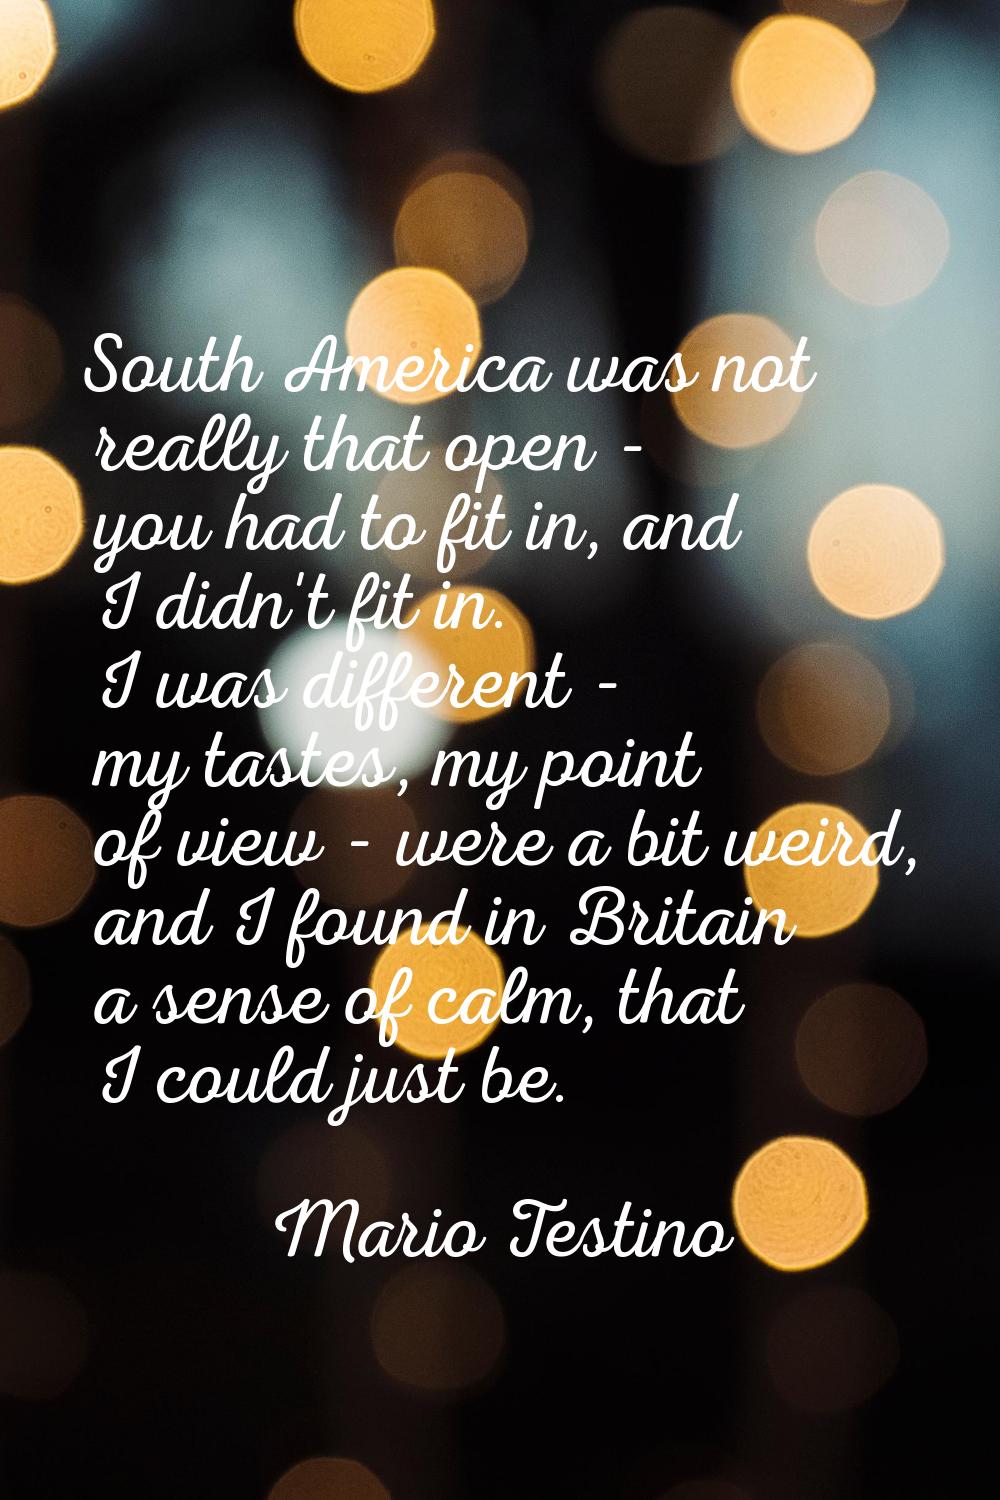 South America was not really that open - you had to fit in, and I didn't fit in. I was different - 